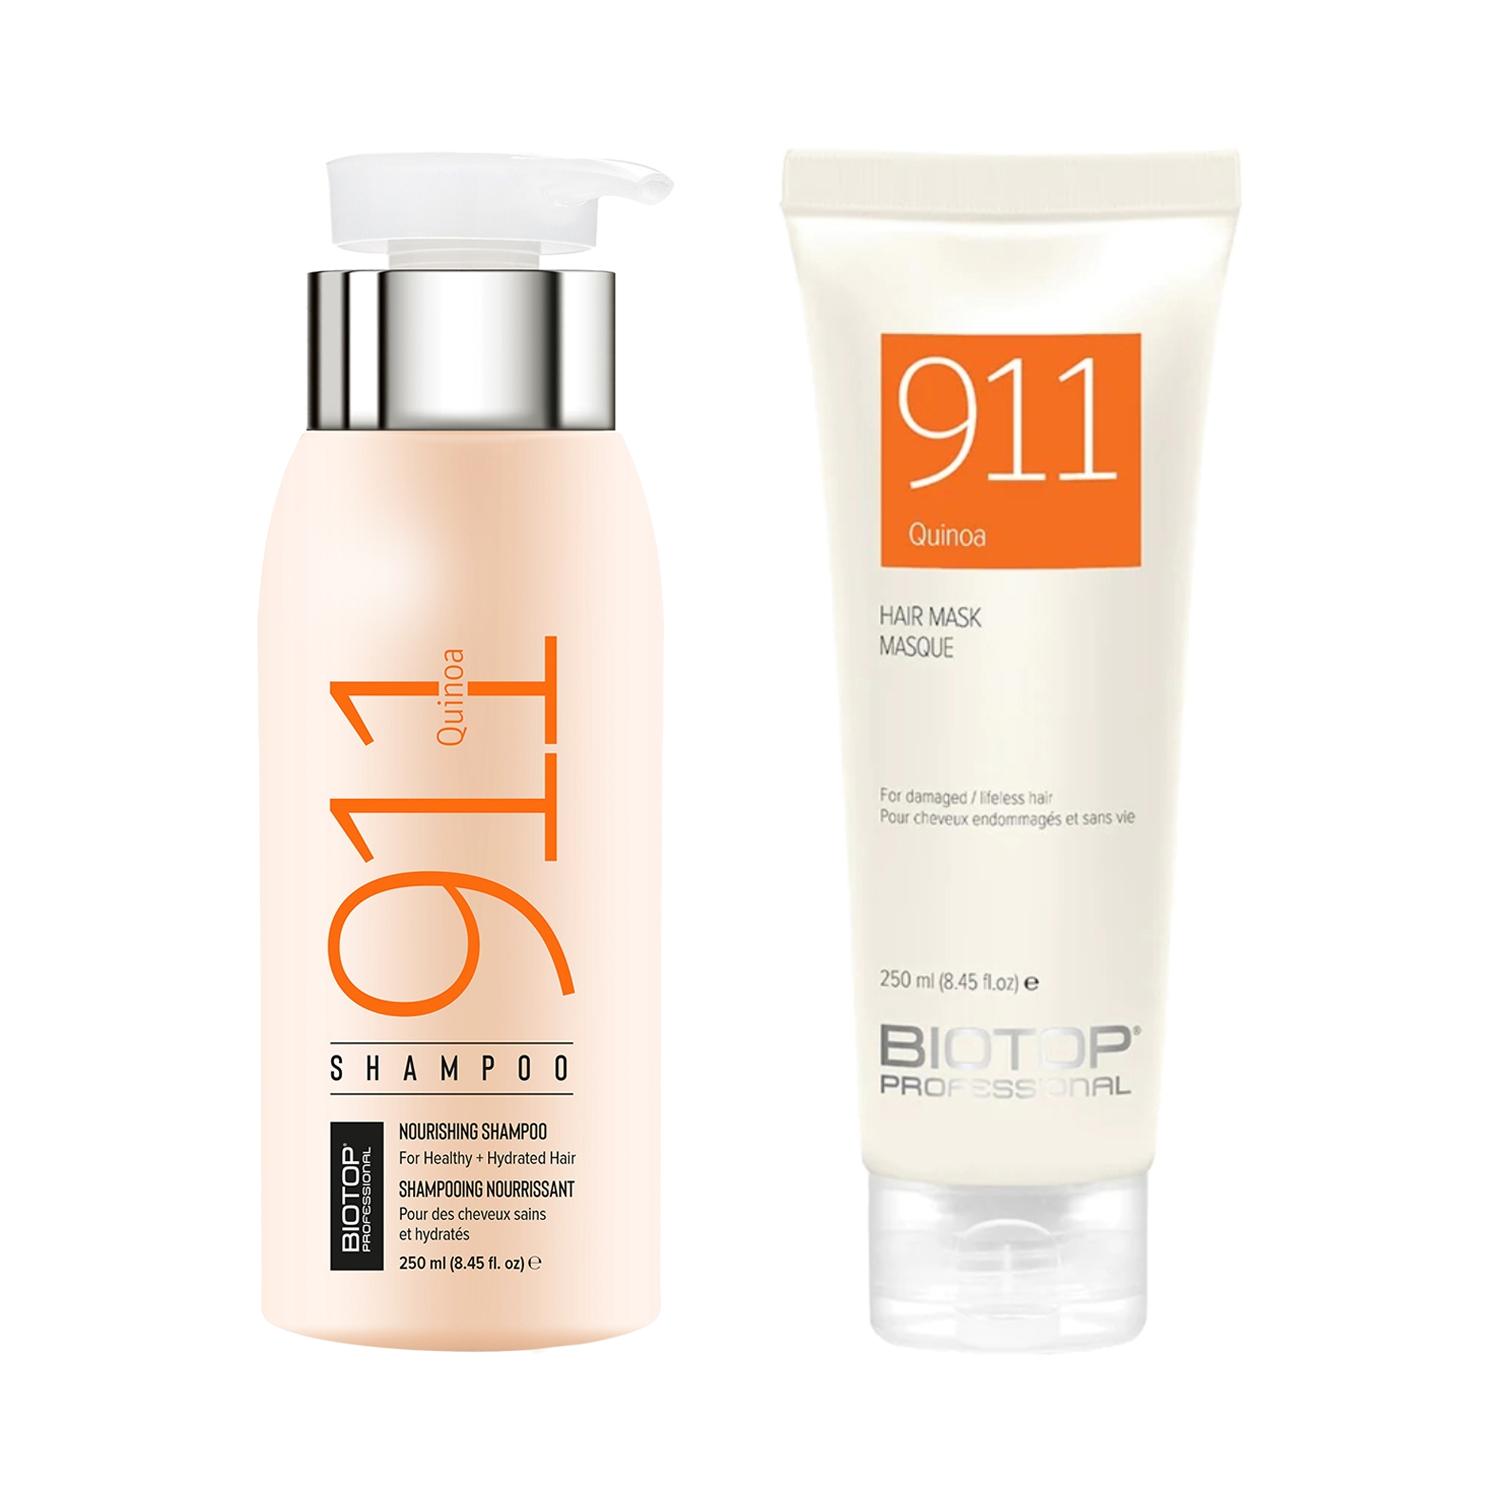 Biotop Professional | Biotop Professional 911 Shampoo & Hair Mask Pack of 2 (250 ml Each)